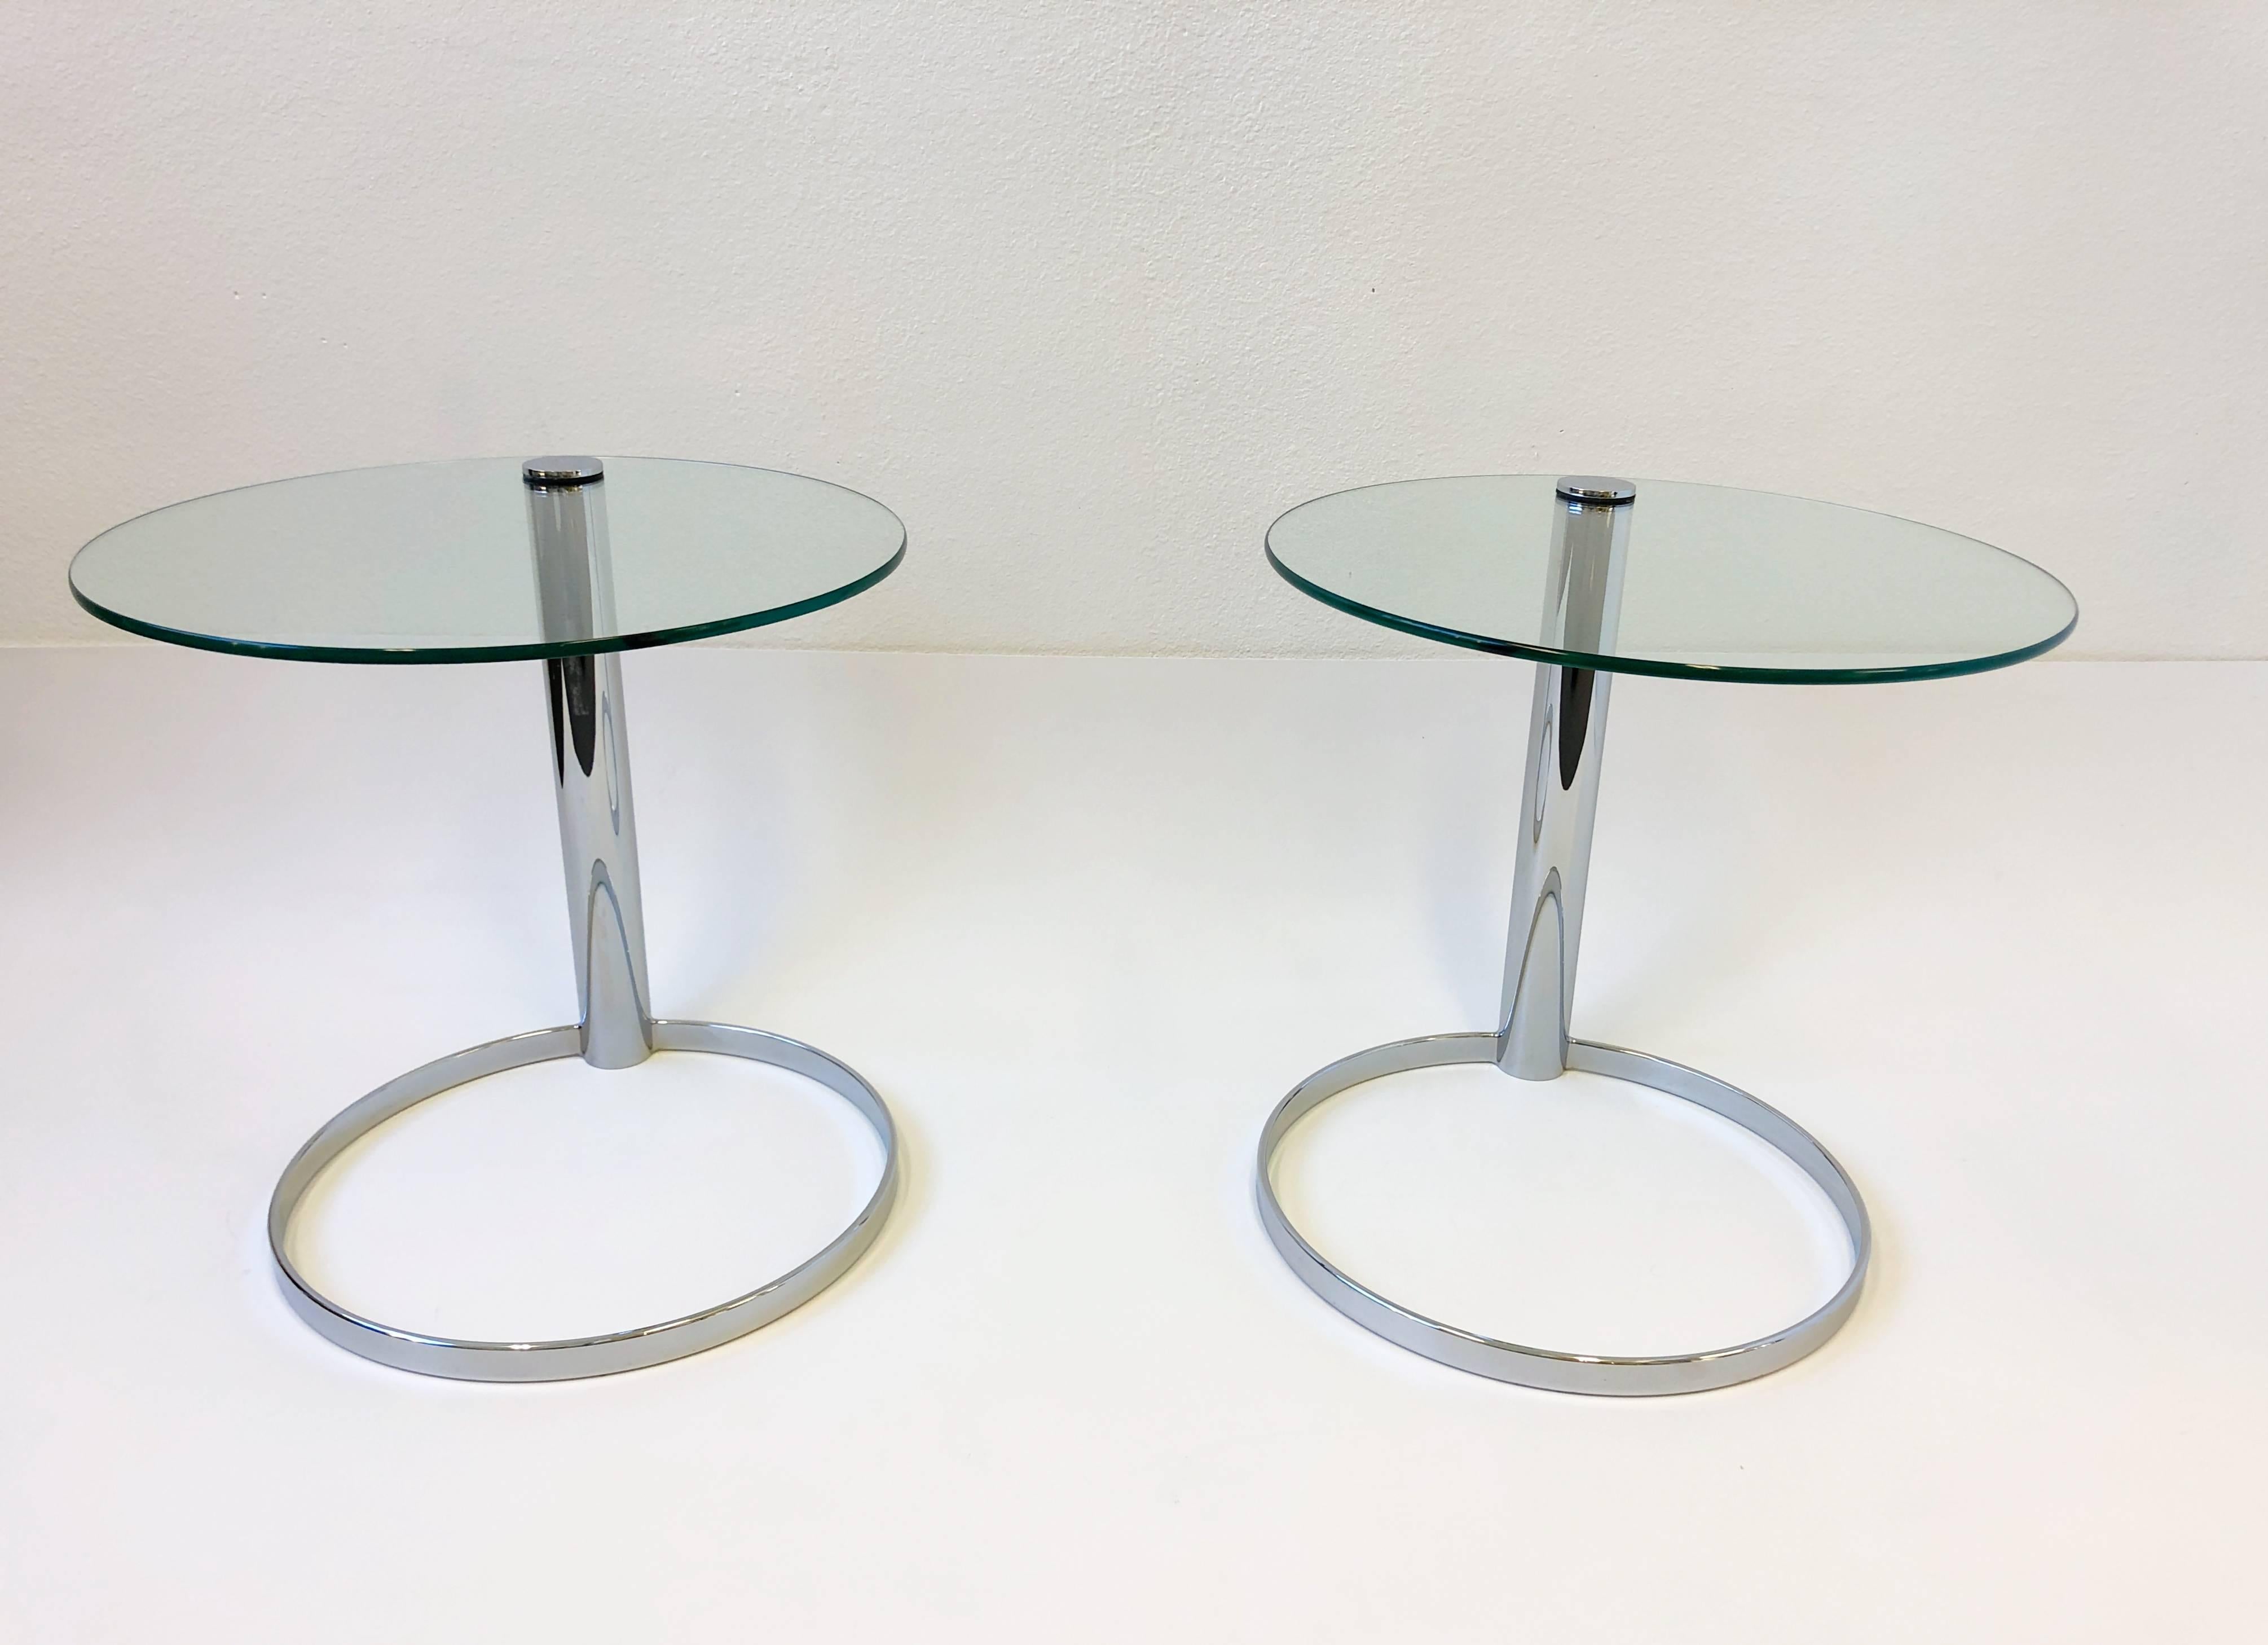 American Pair of Chrome and Glass Side Tables by John Mascheroni for Swaim